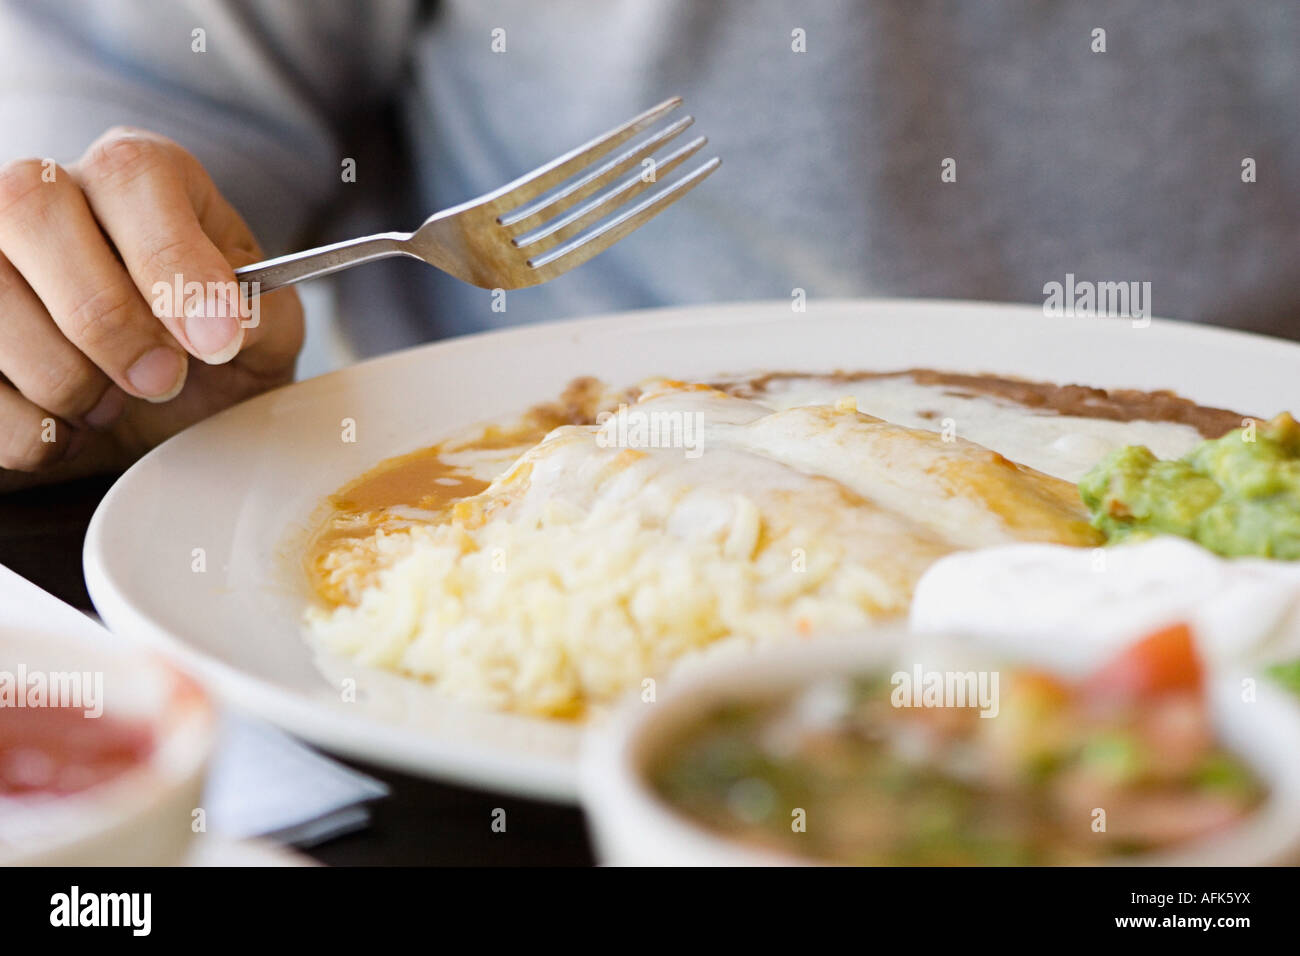 Person eating Mexican food Stock Photo